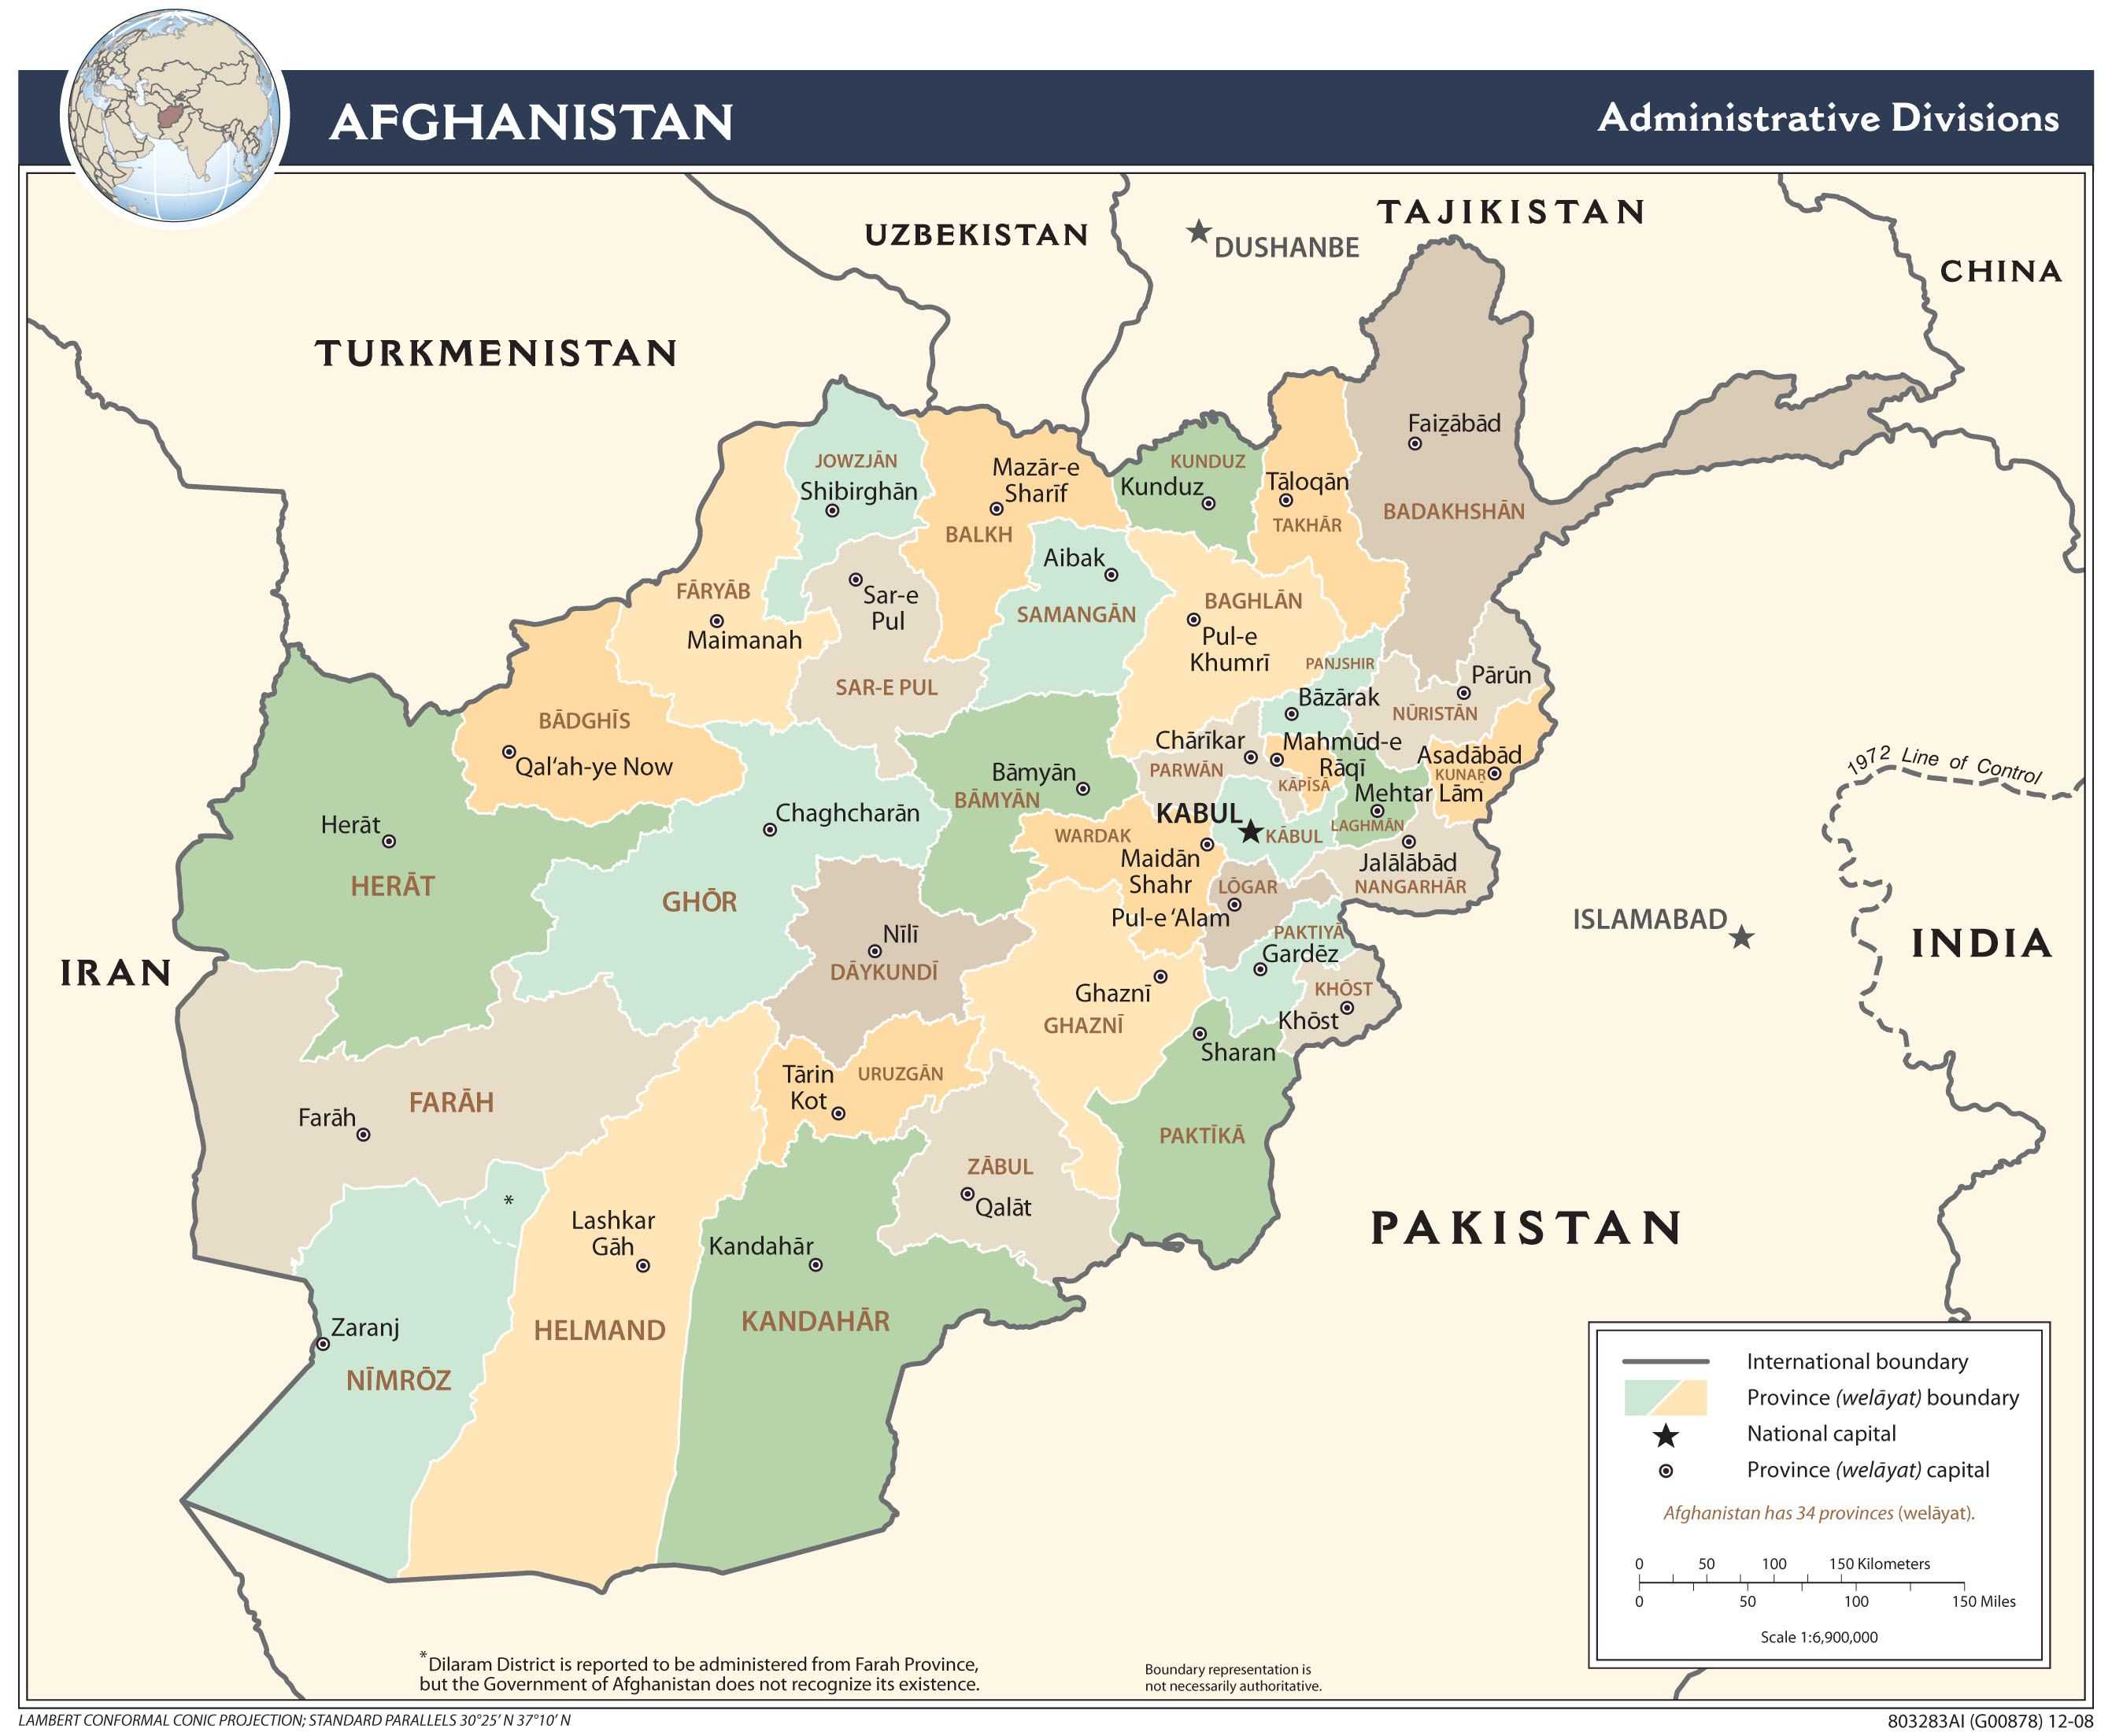 Chapter 12 Empires In East asia Worksheet Answers or Afghanistan is Located In Central asia and Its Capital is Kabul the